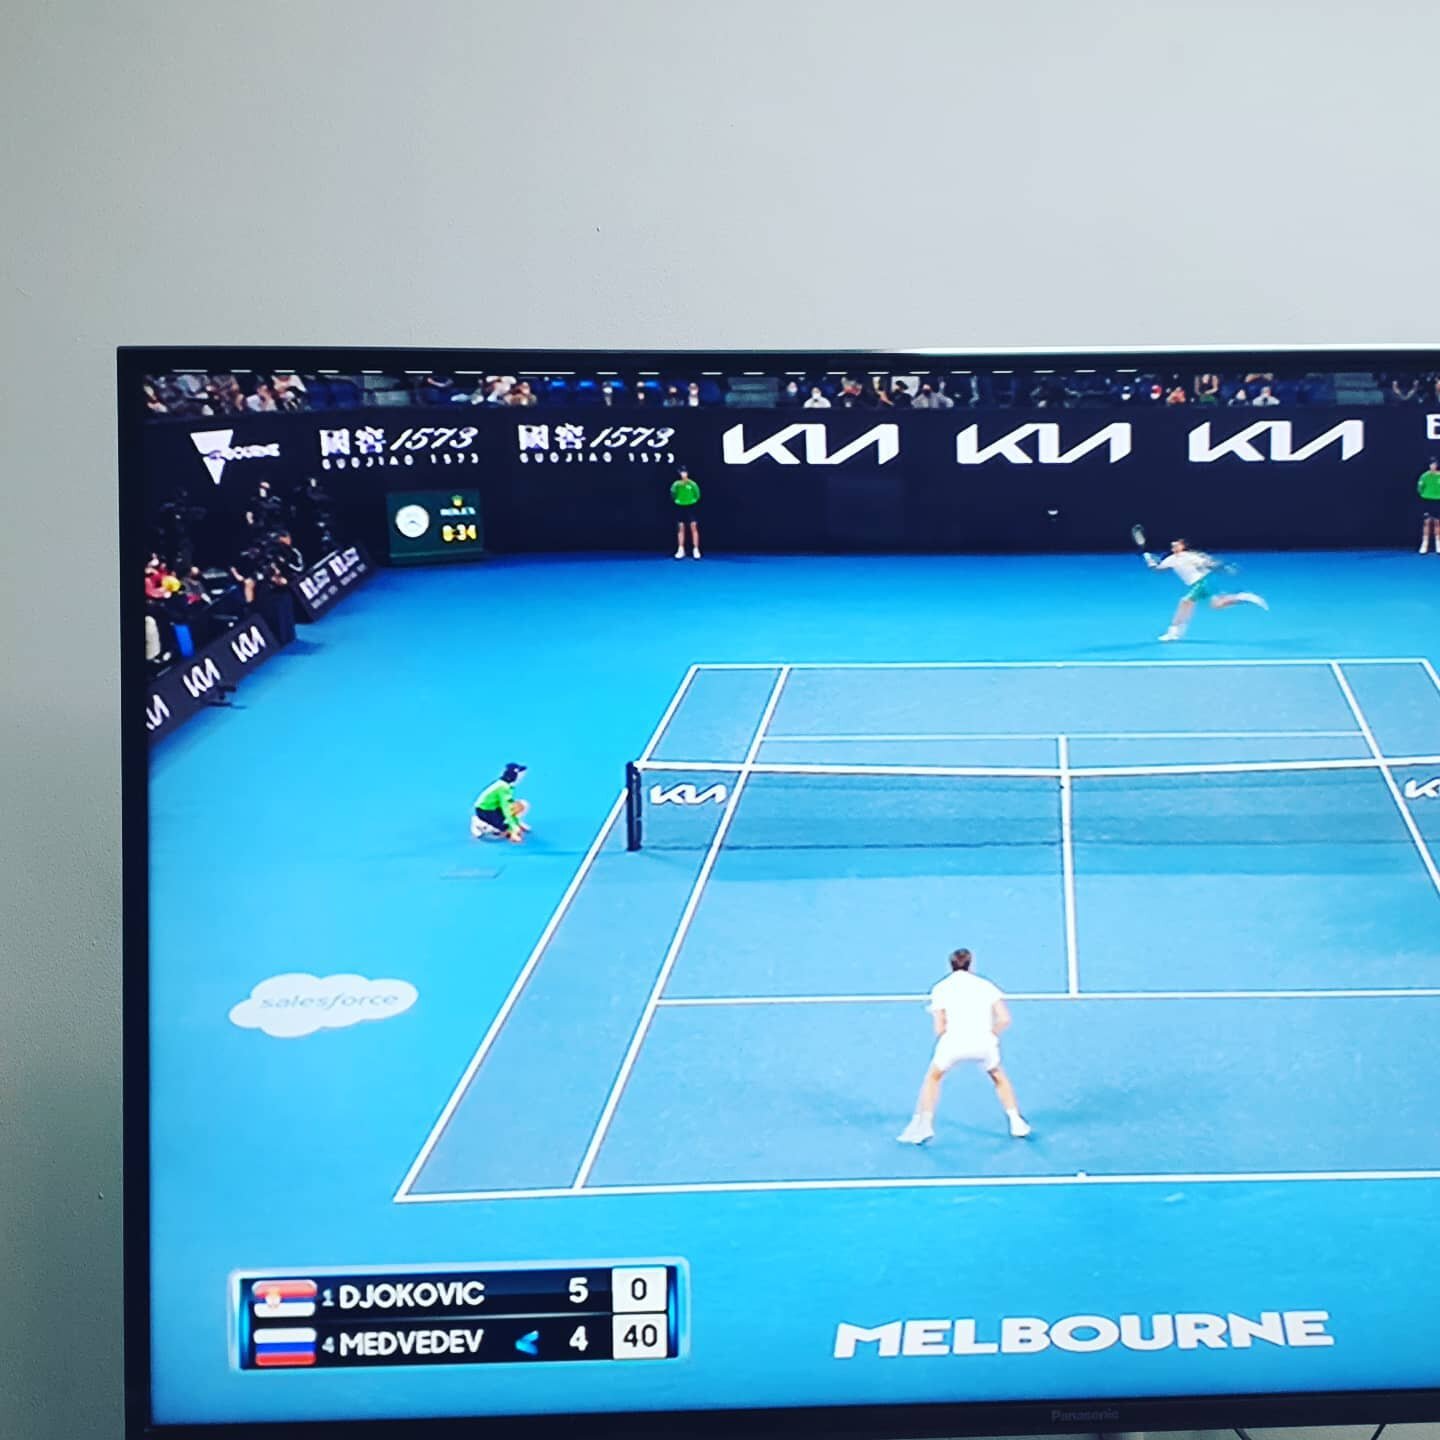 Who's winning this?? Close game! @djokernole @medwed33 @australianopen #aofinal #ao2021